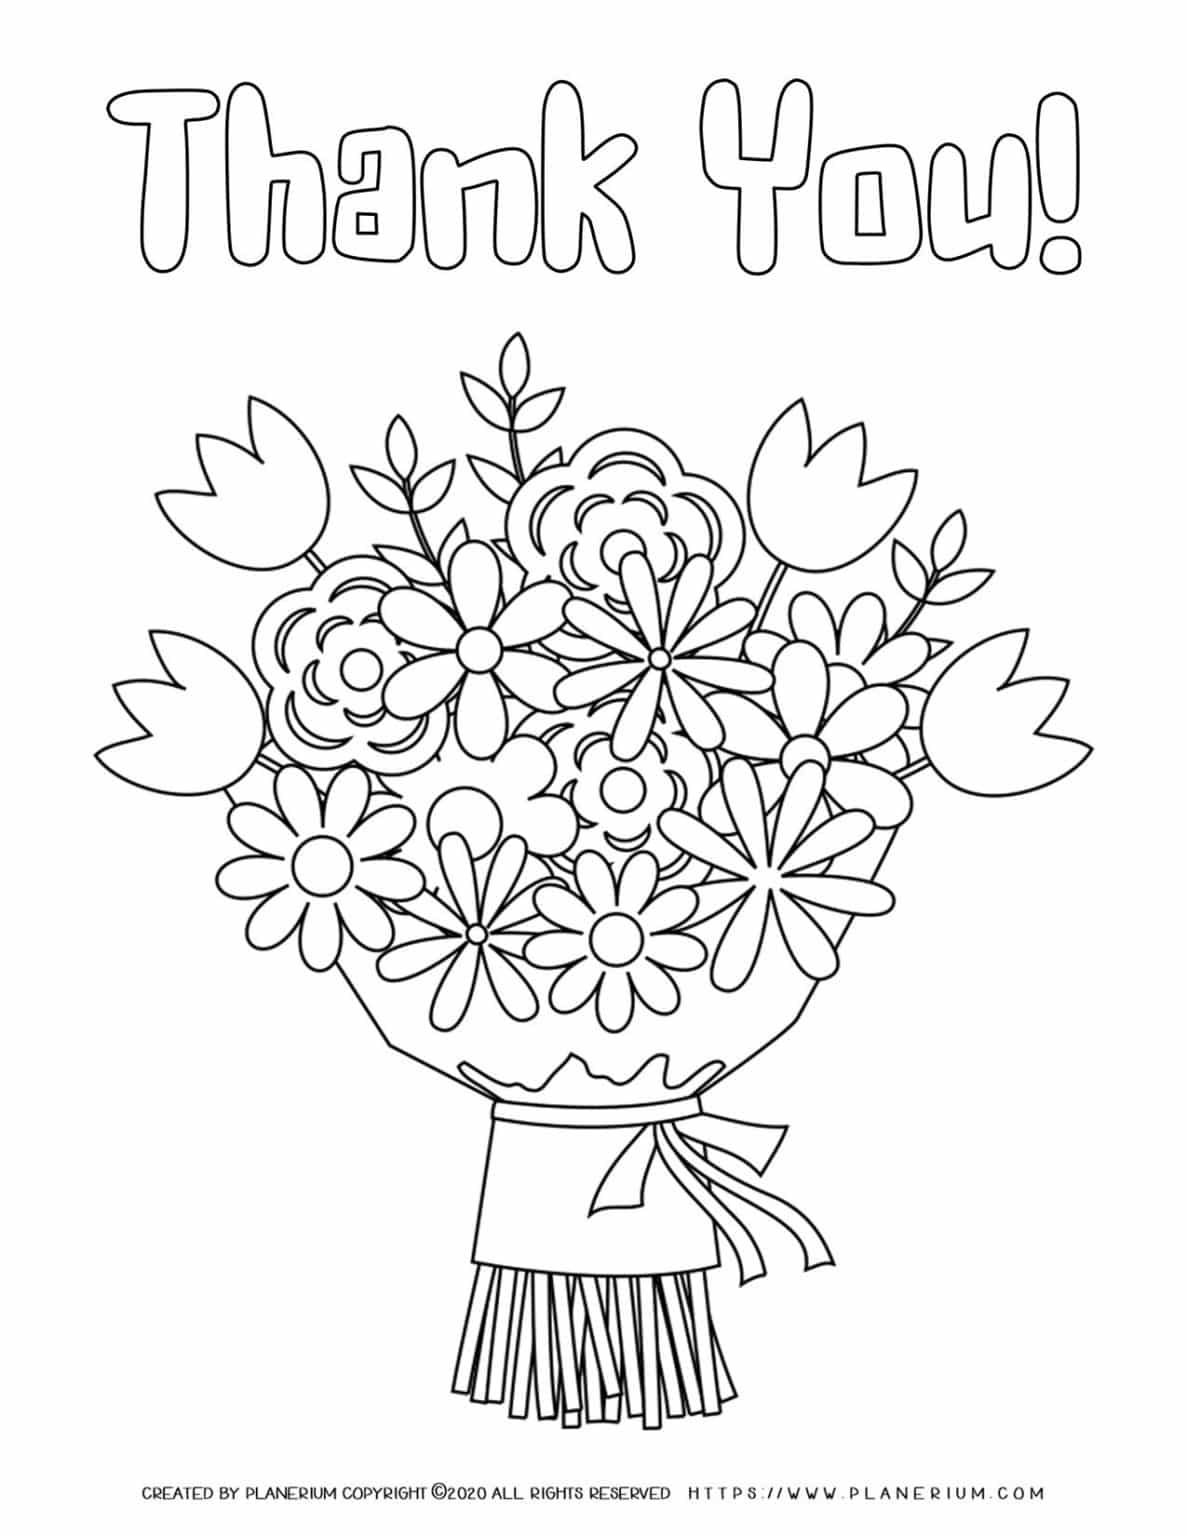 thank-you-flowers-coloring-pages-free-printables-planerium